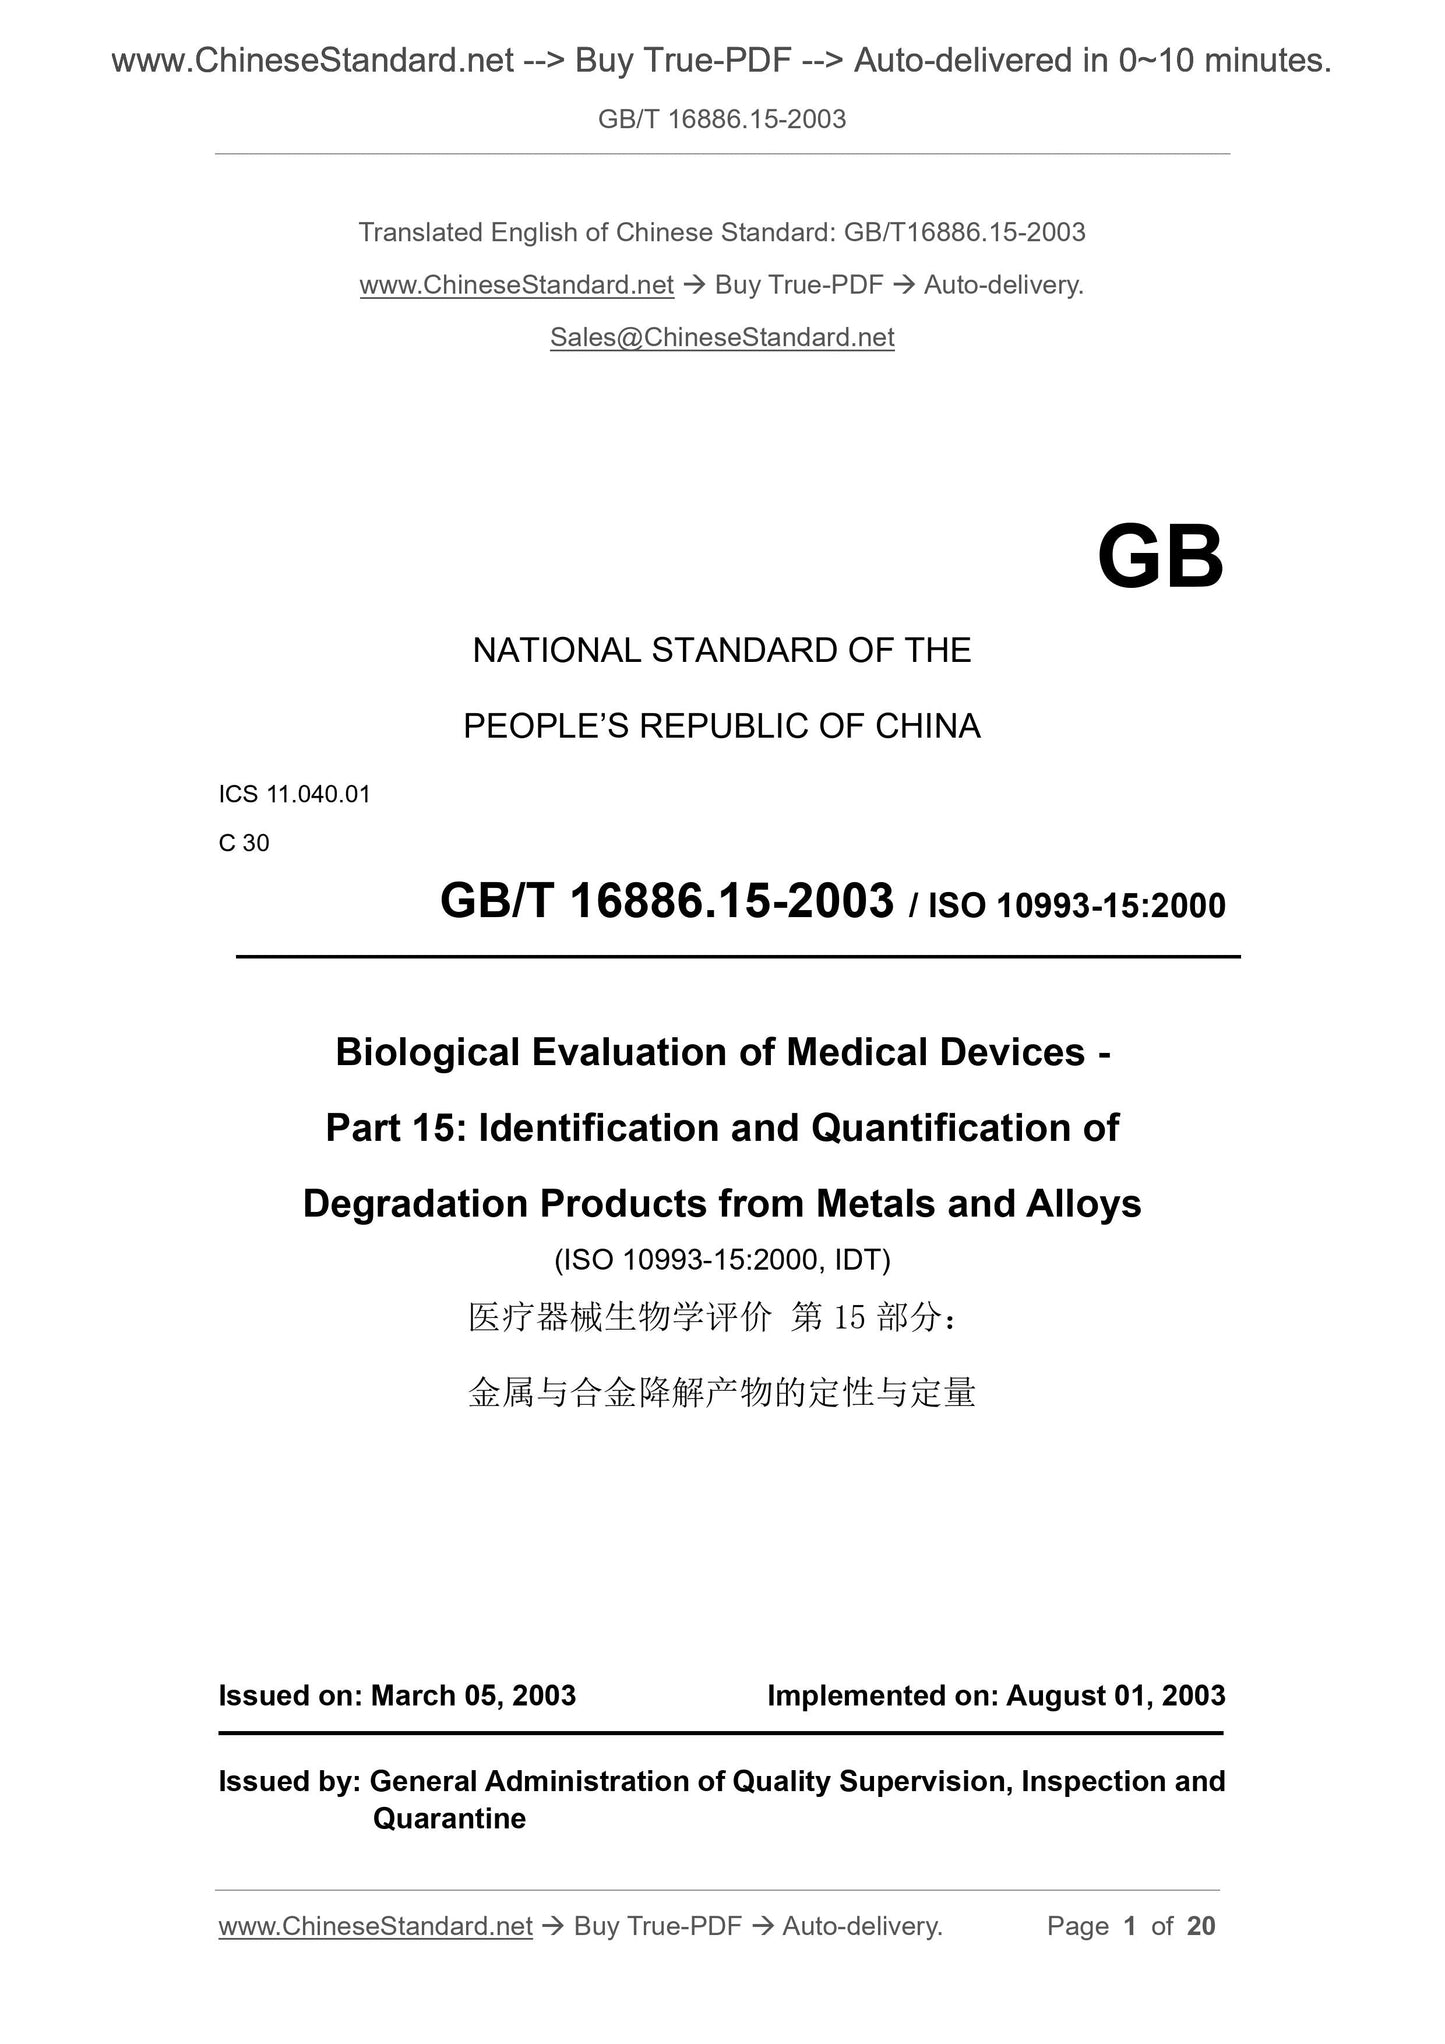 GB/T 16886.15-2003 Page 1